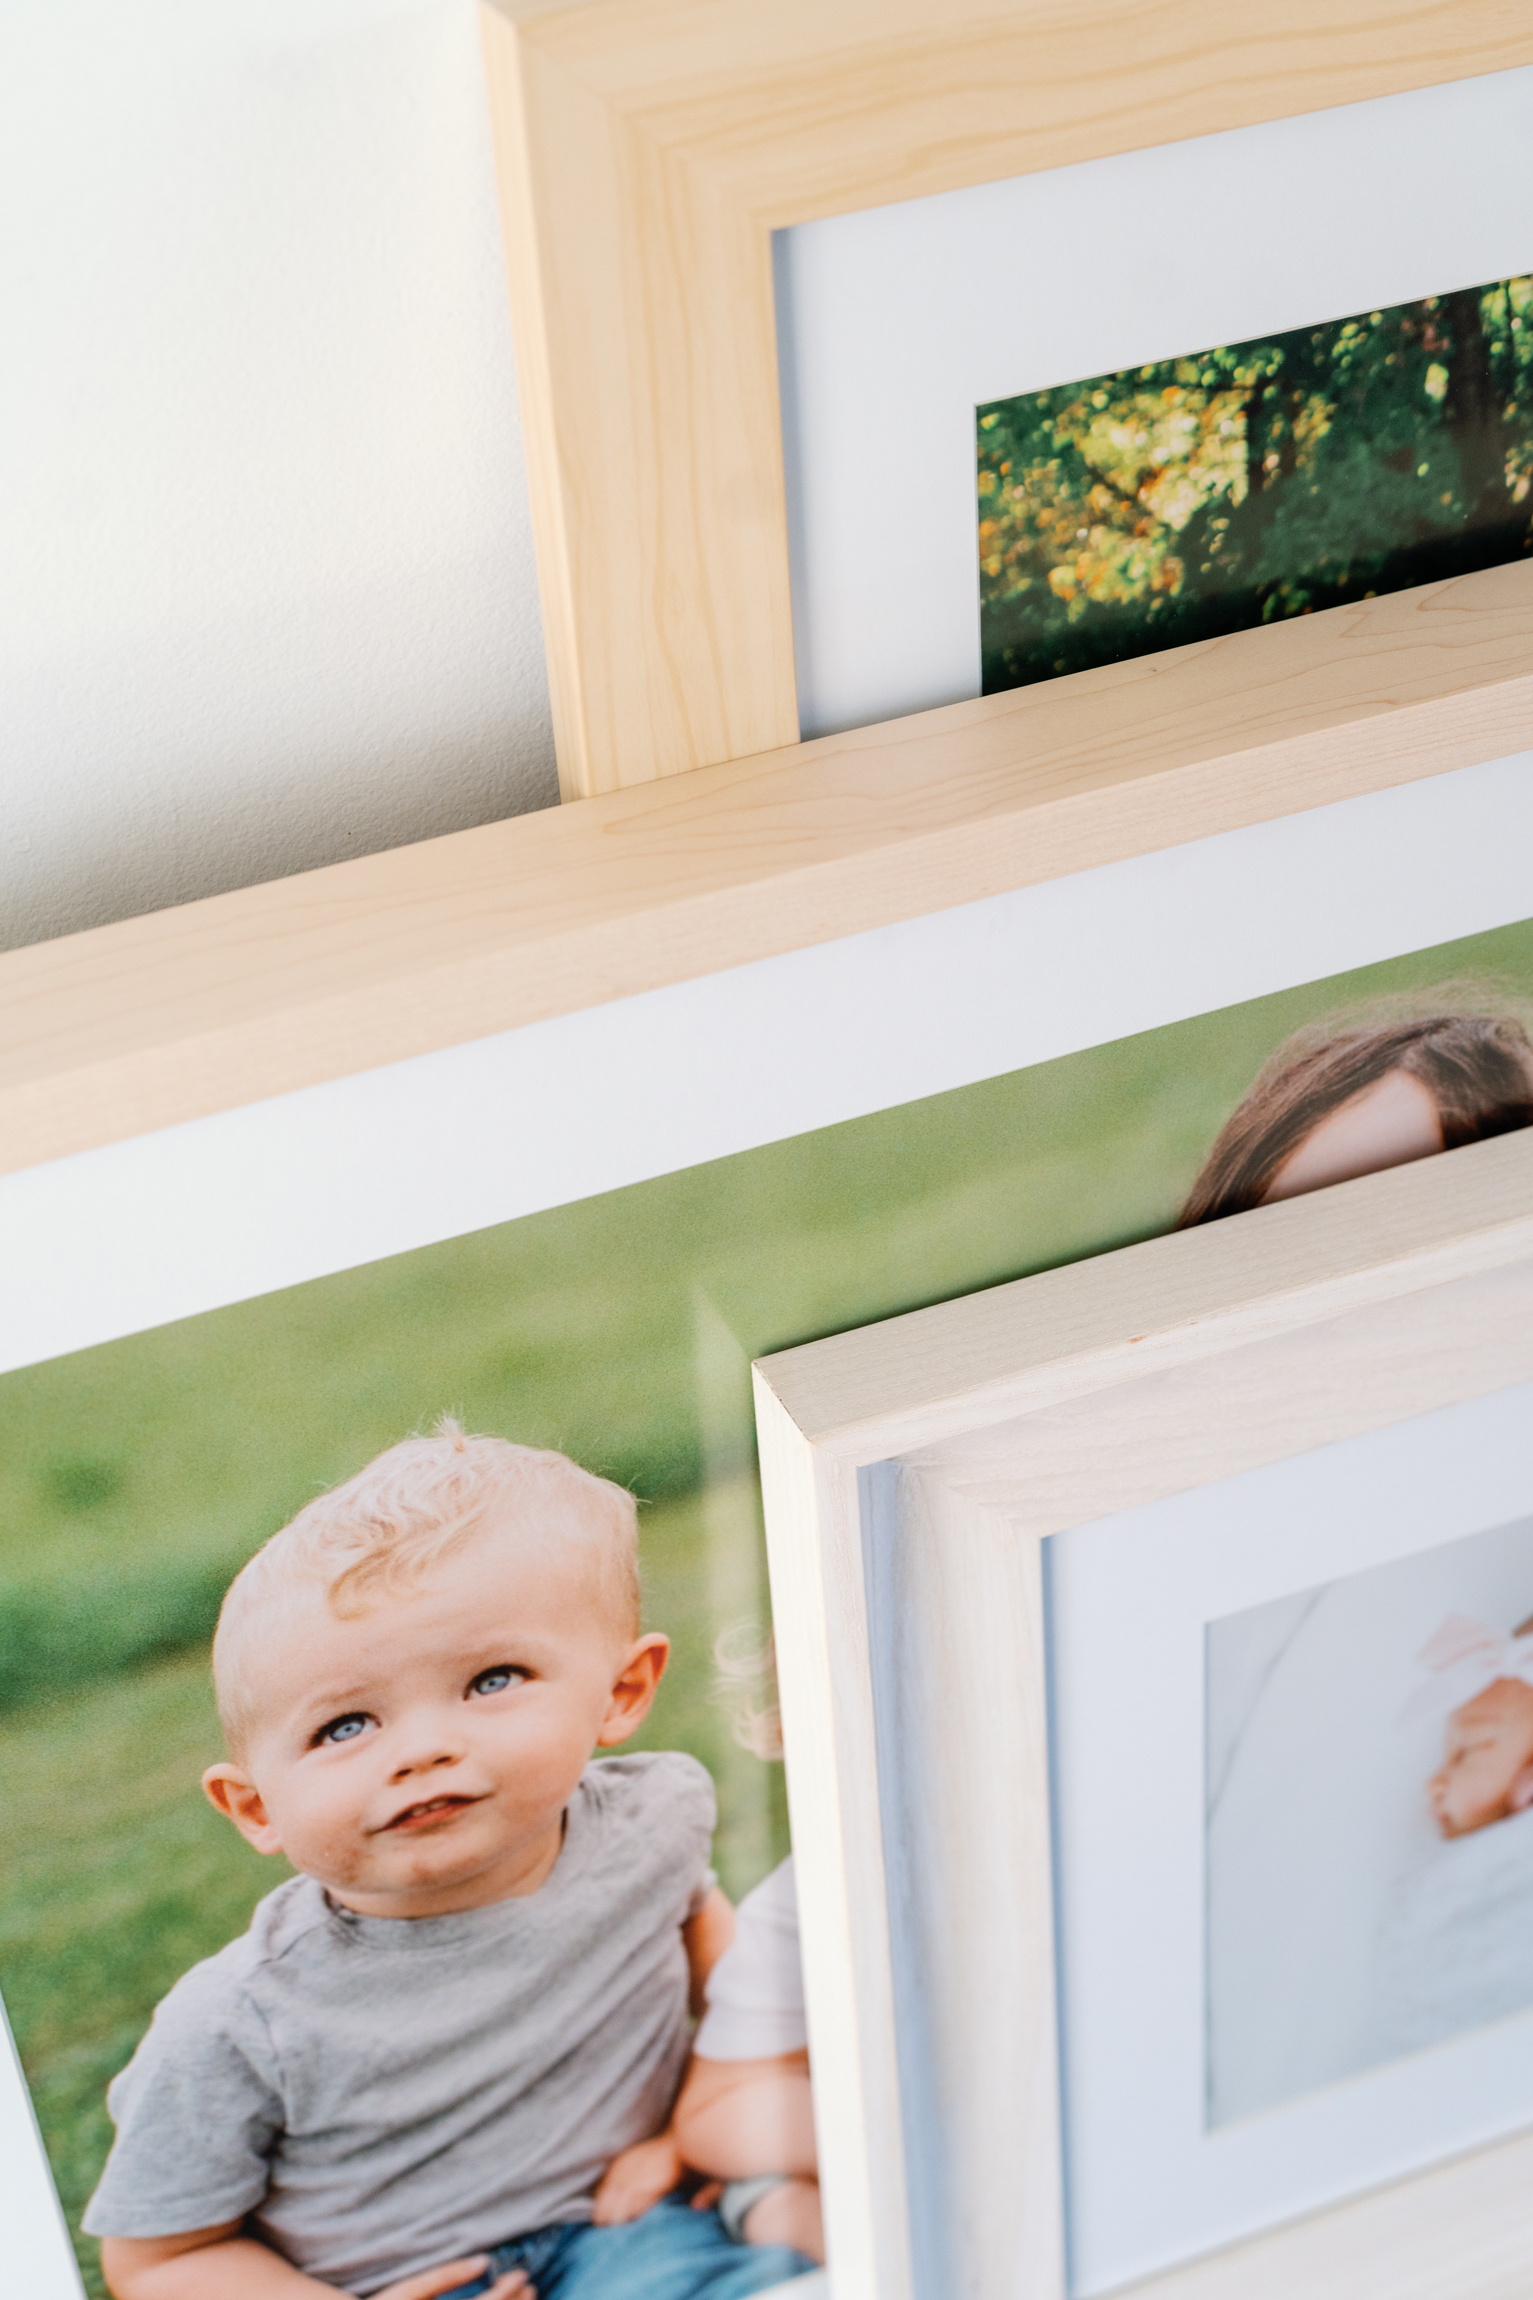 Knoxville family portrait photographer specializing in heirlooms and products.